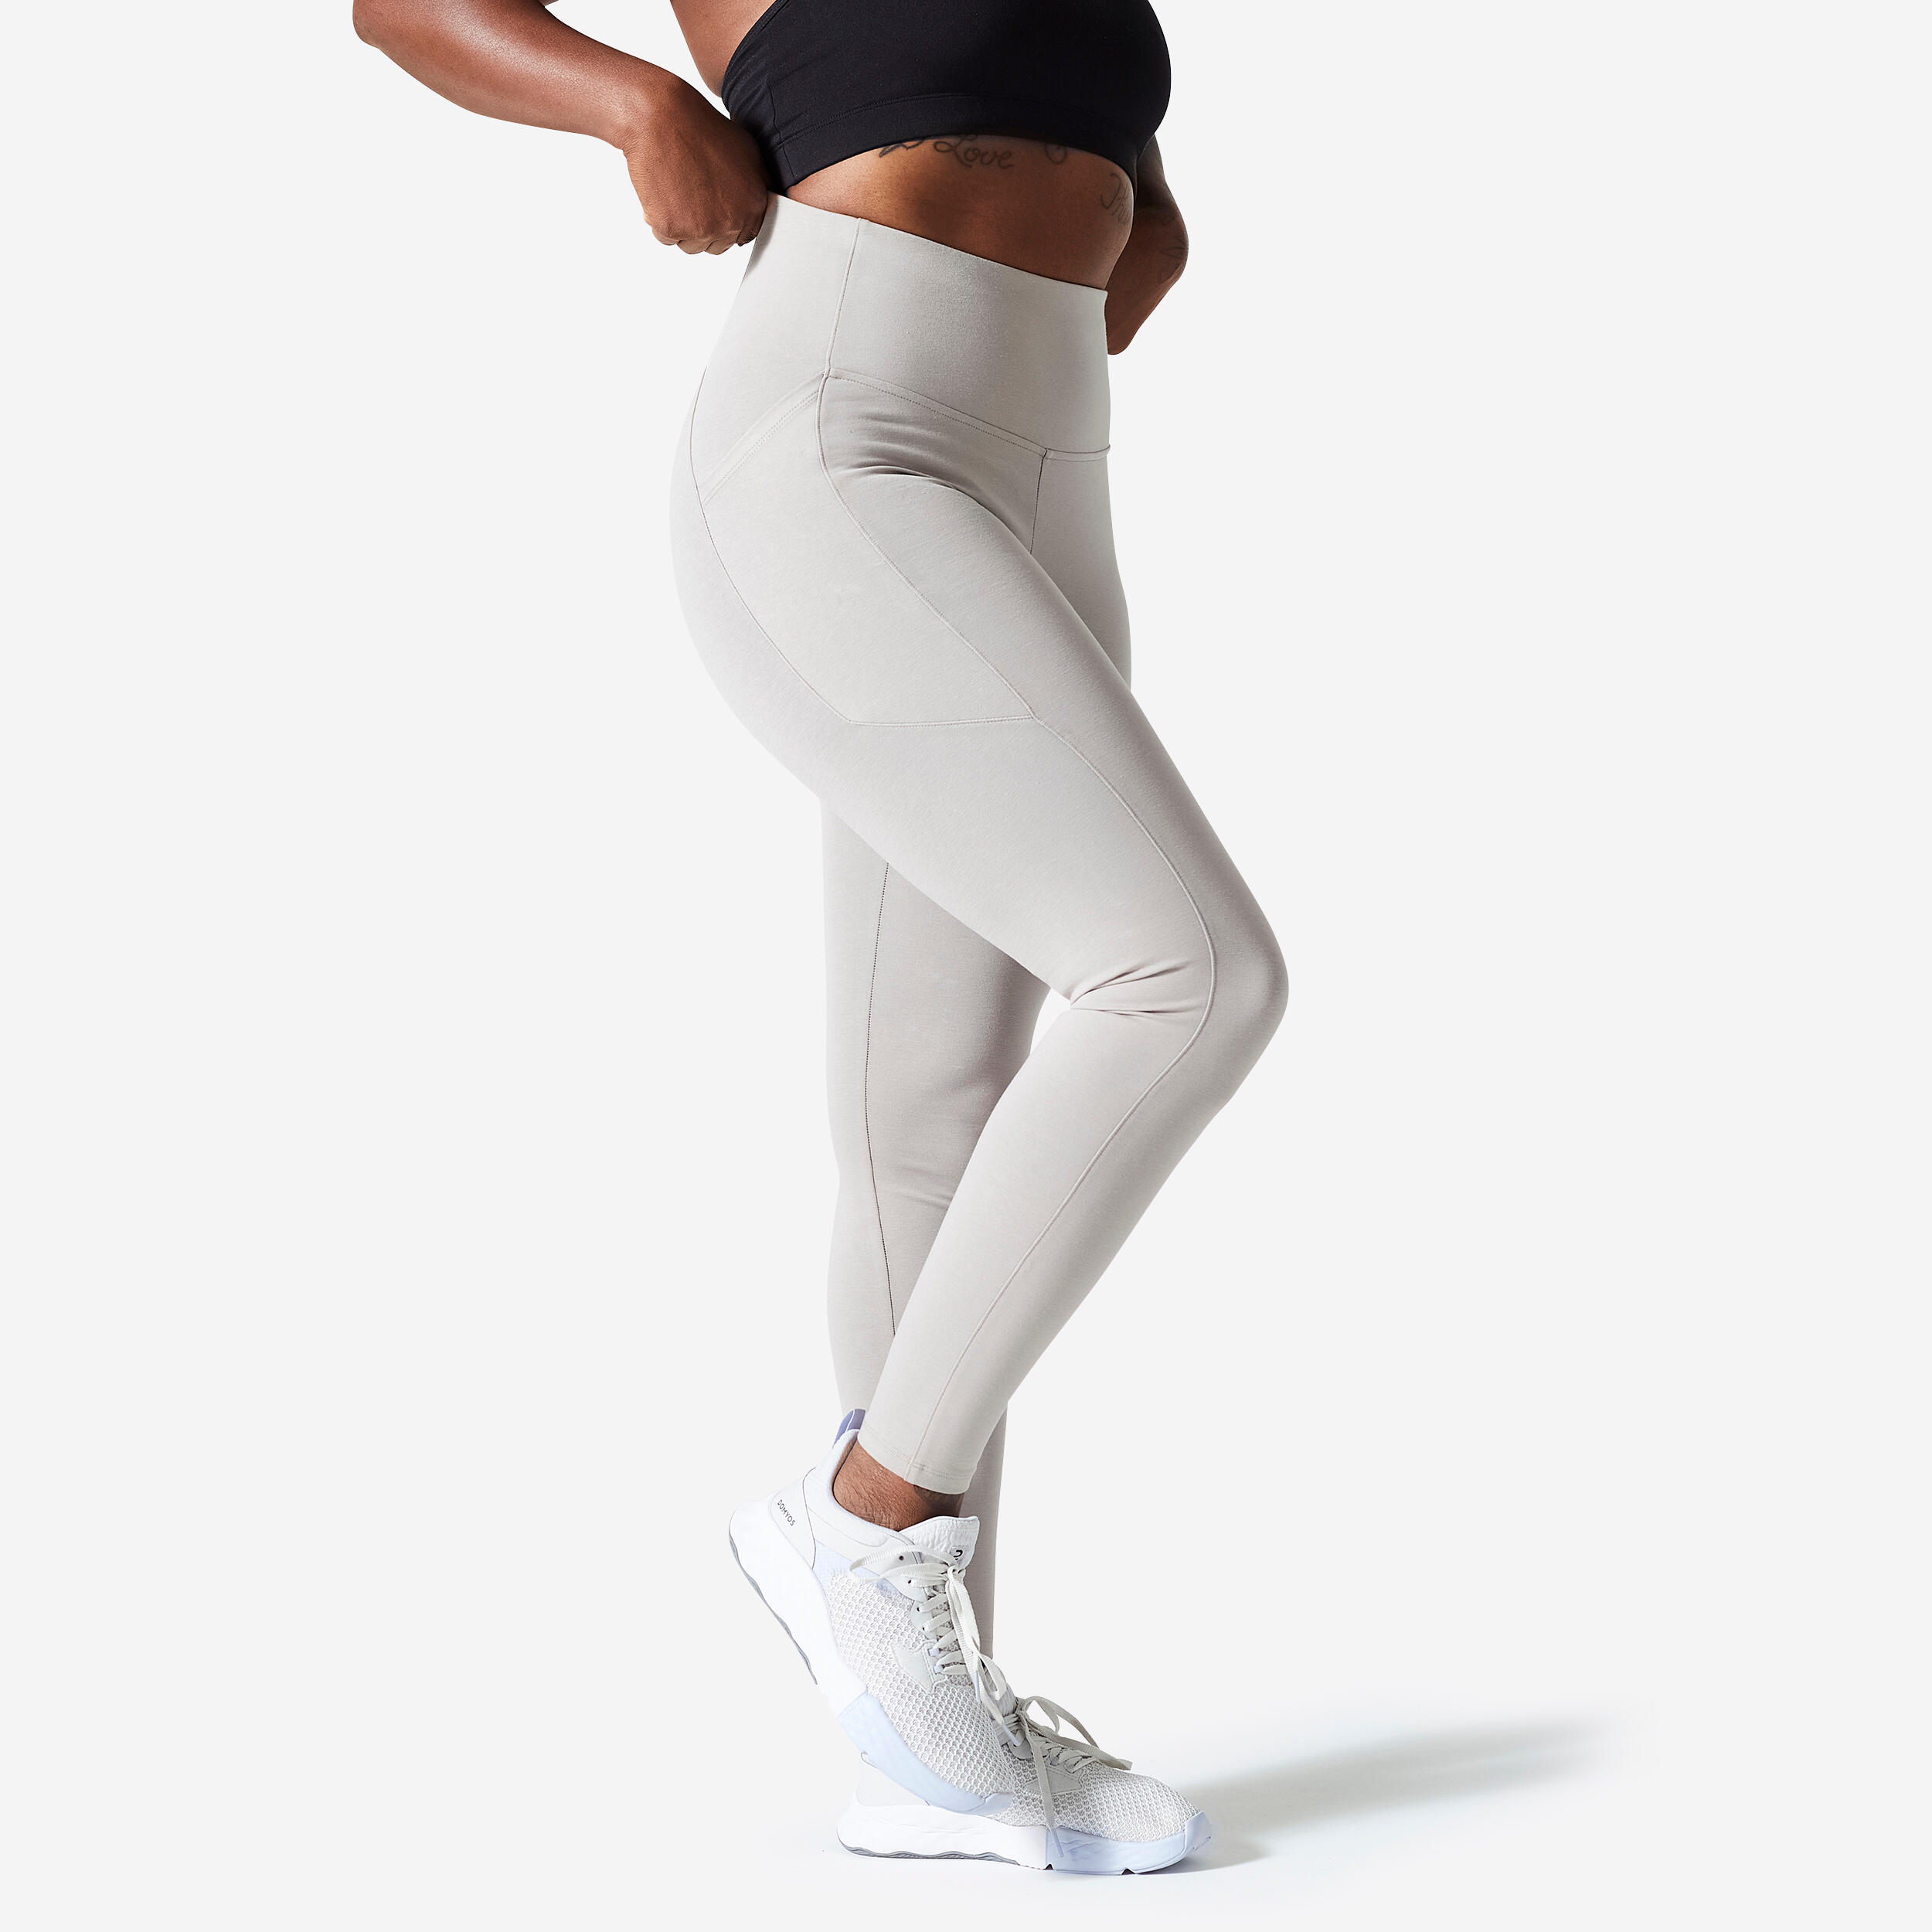 Jalioing Yoga Leggings for Women High Waist Solid Color Ribbed